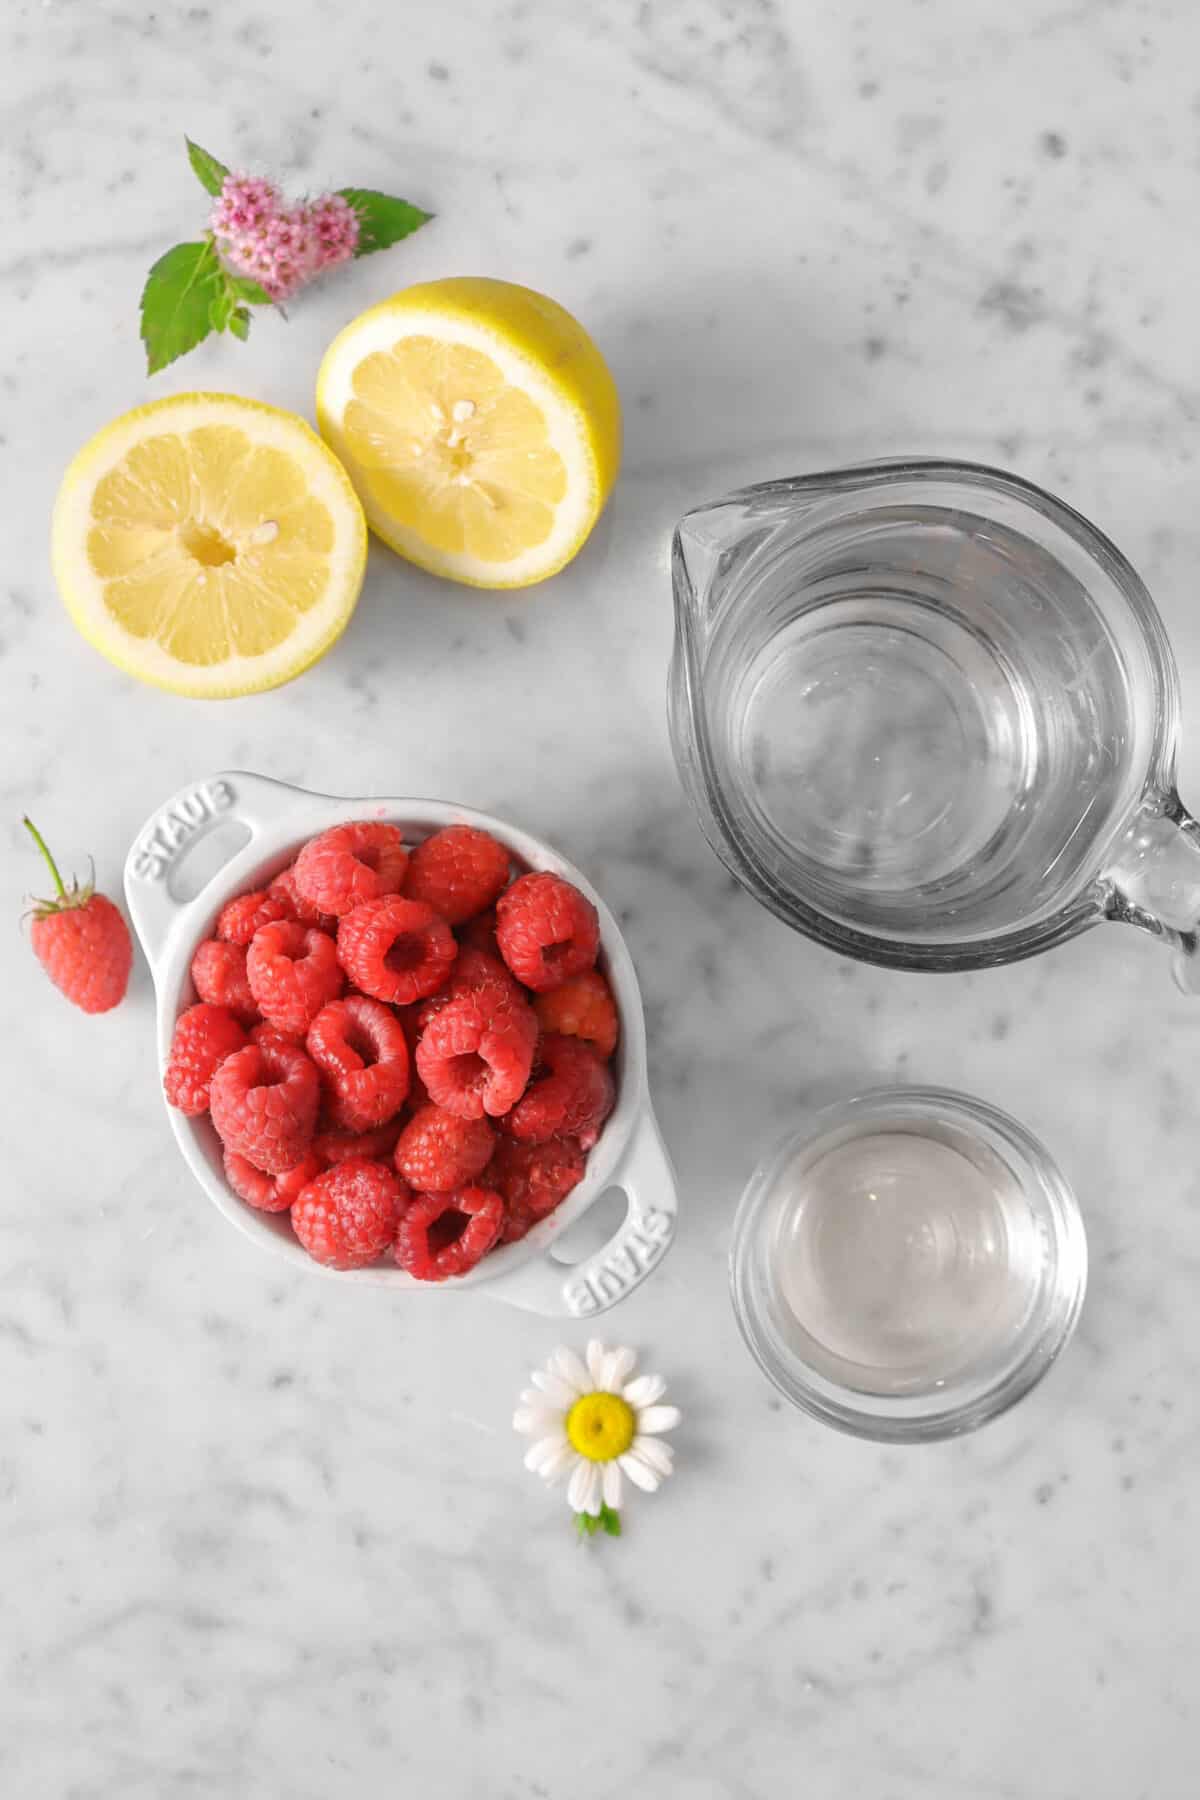 raspberries, a lemon sliced in half, a cup of water, simple syrup, and flowers